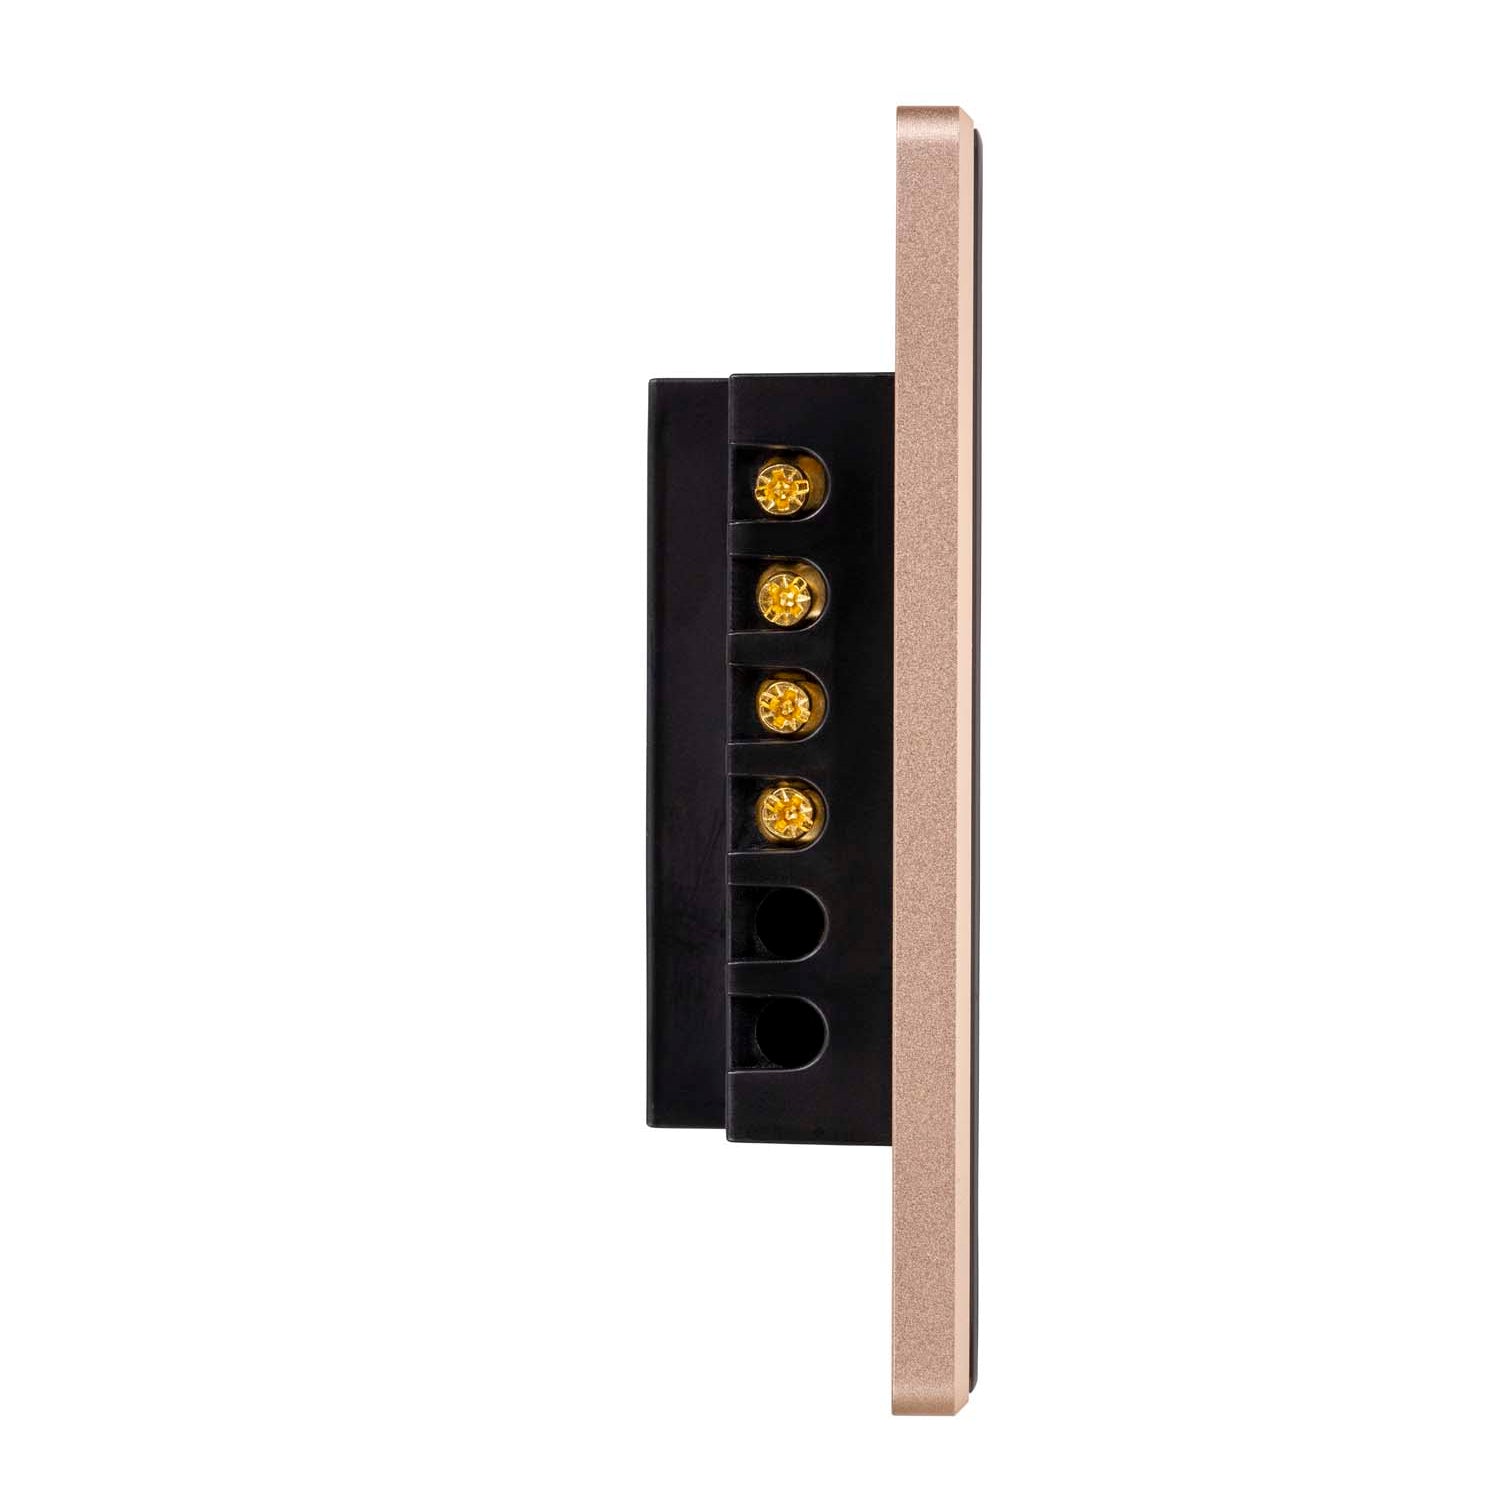 HV9220-2 - Wifi 2 Gang Black with Gold Trim Wall Switch